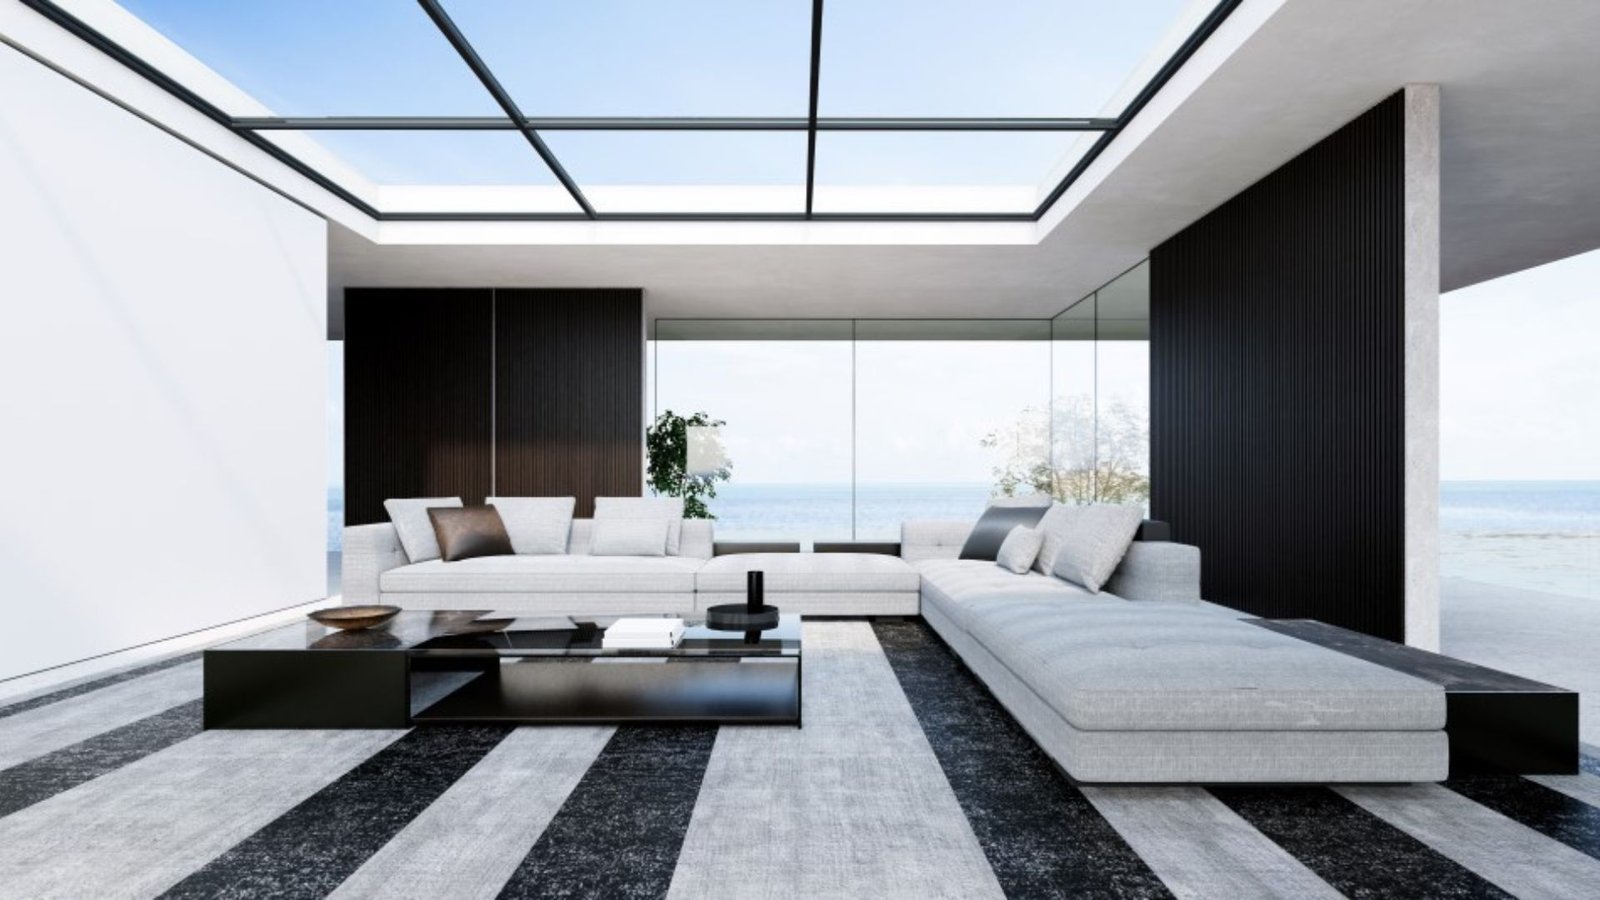 this image shows Skylight Shades